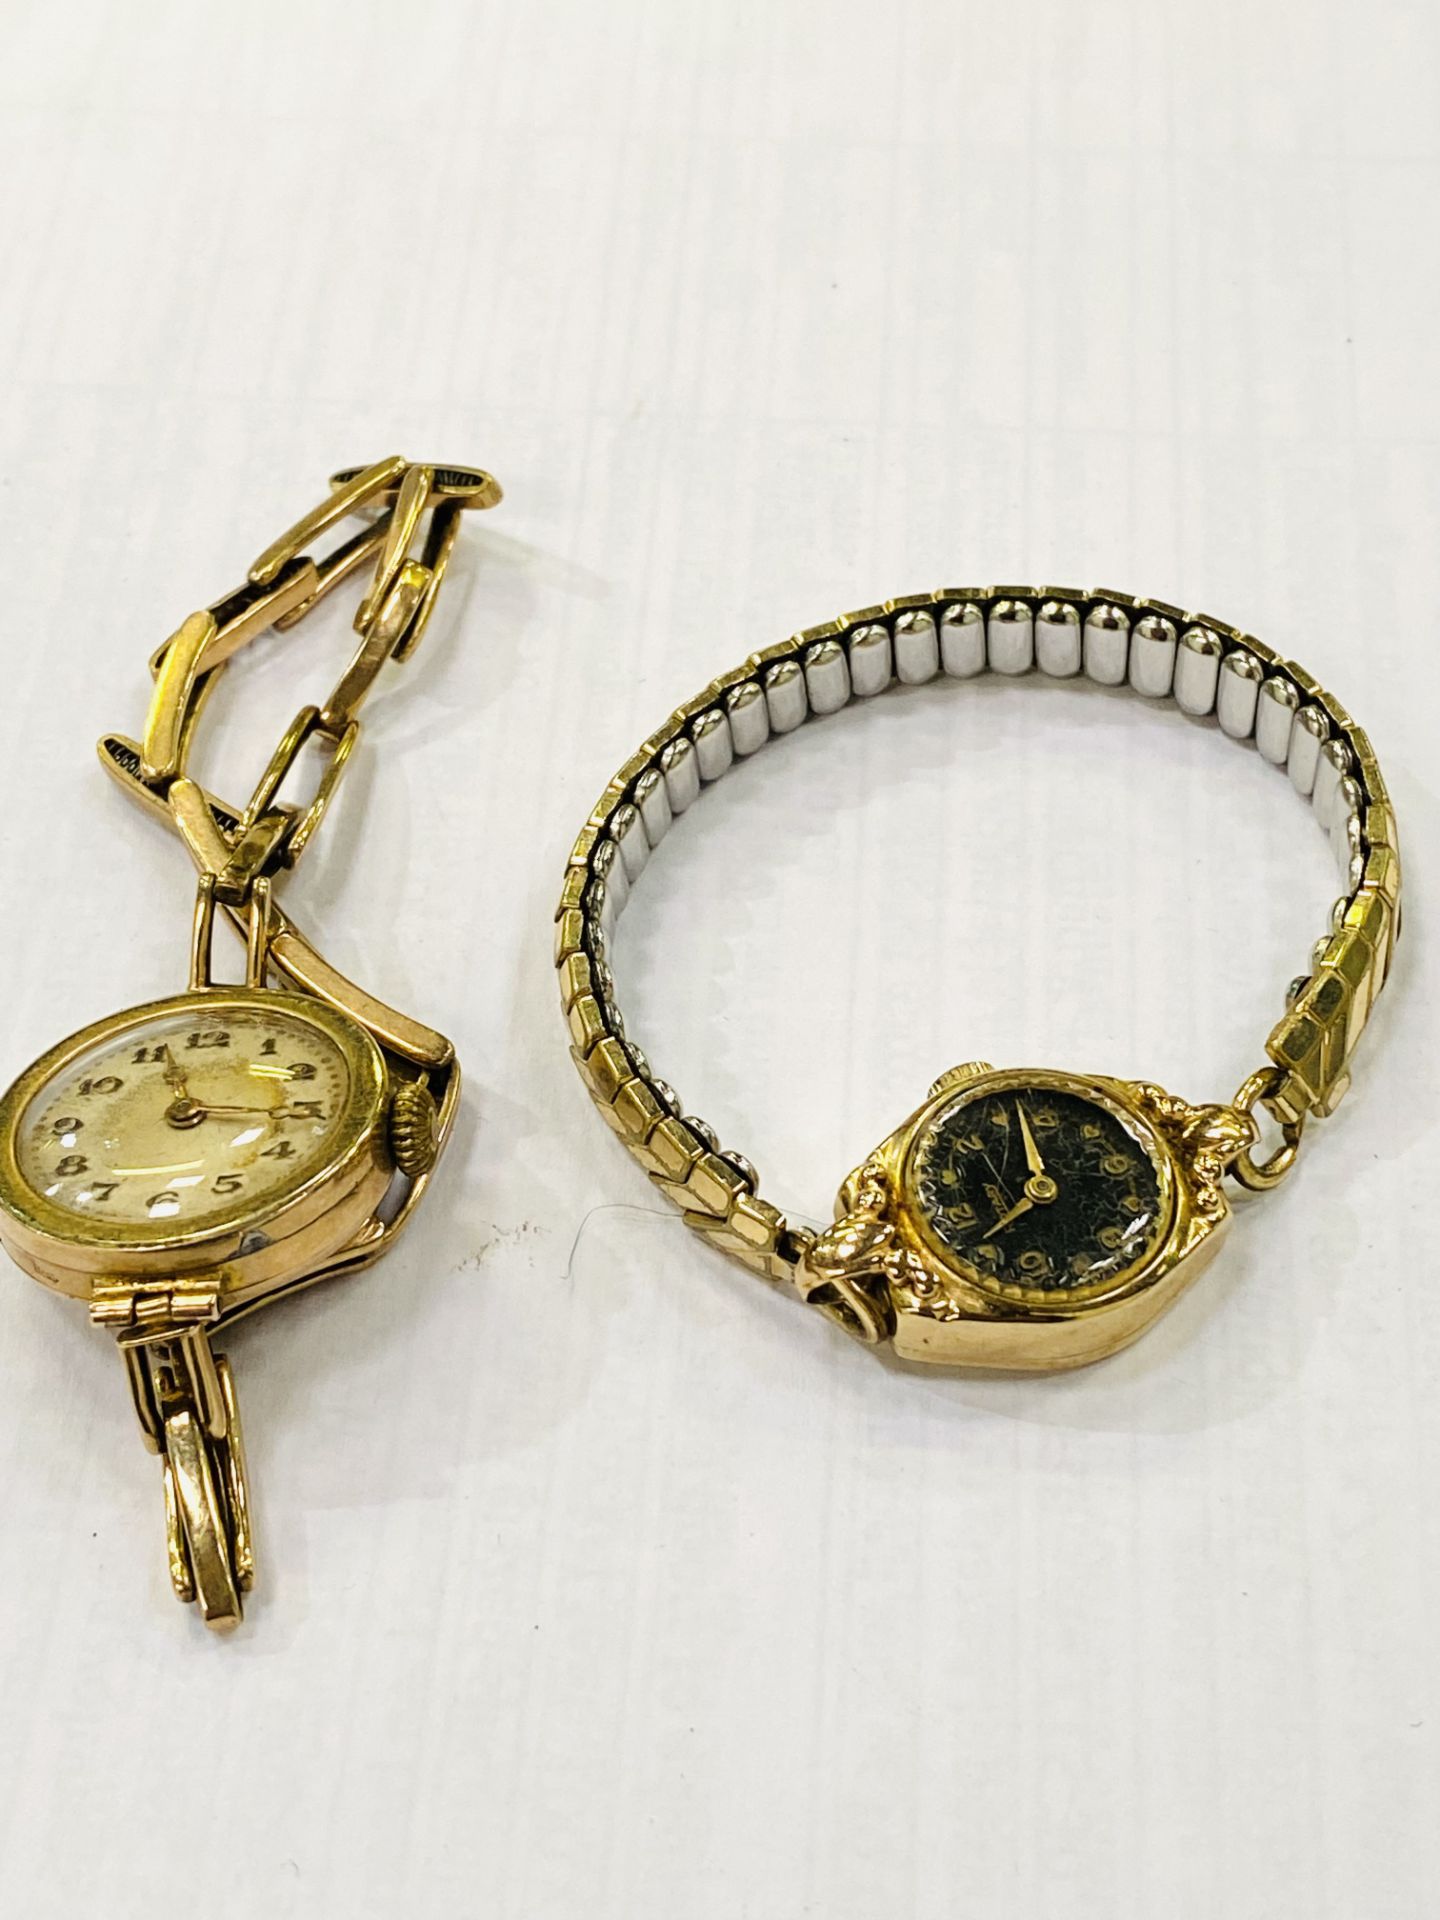 9ct gold cased wrist watch together with a 9ct gold cased Rotary wrist watch